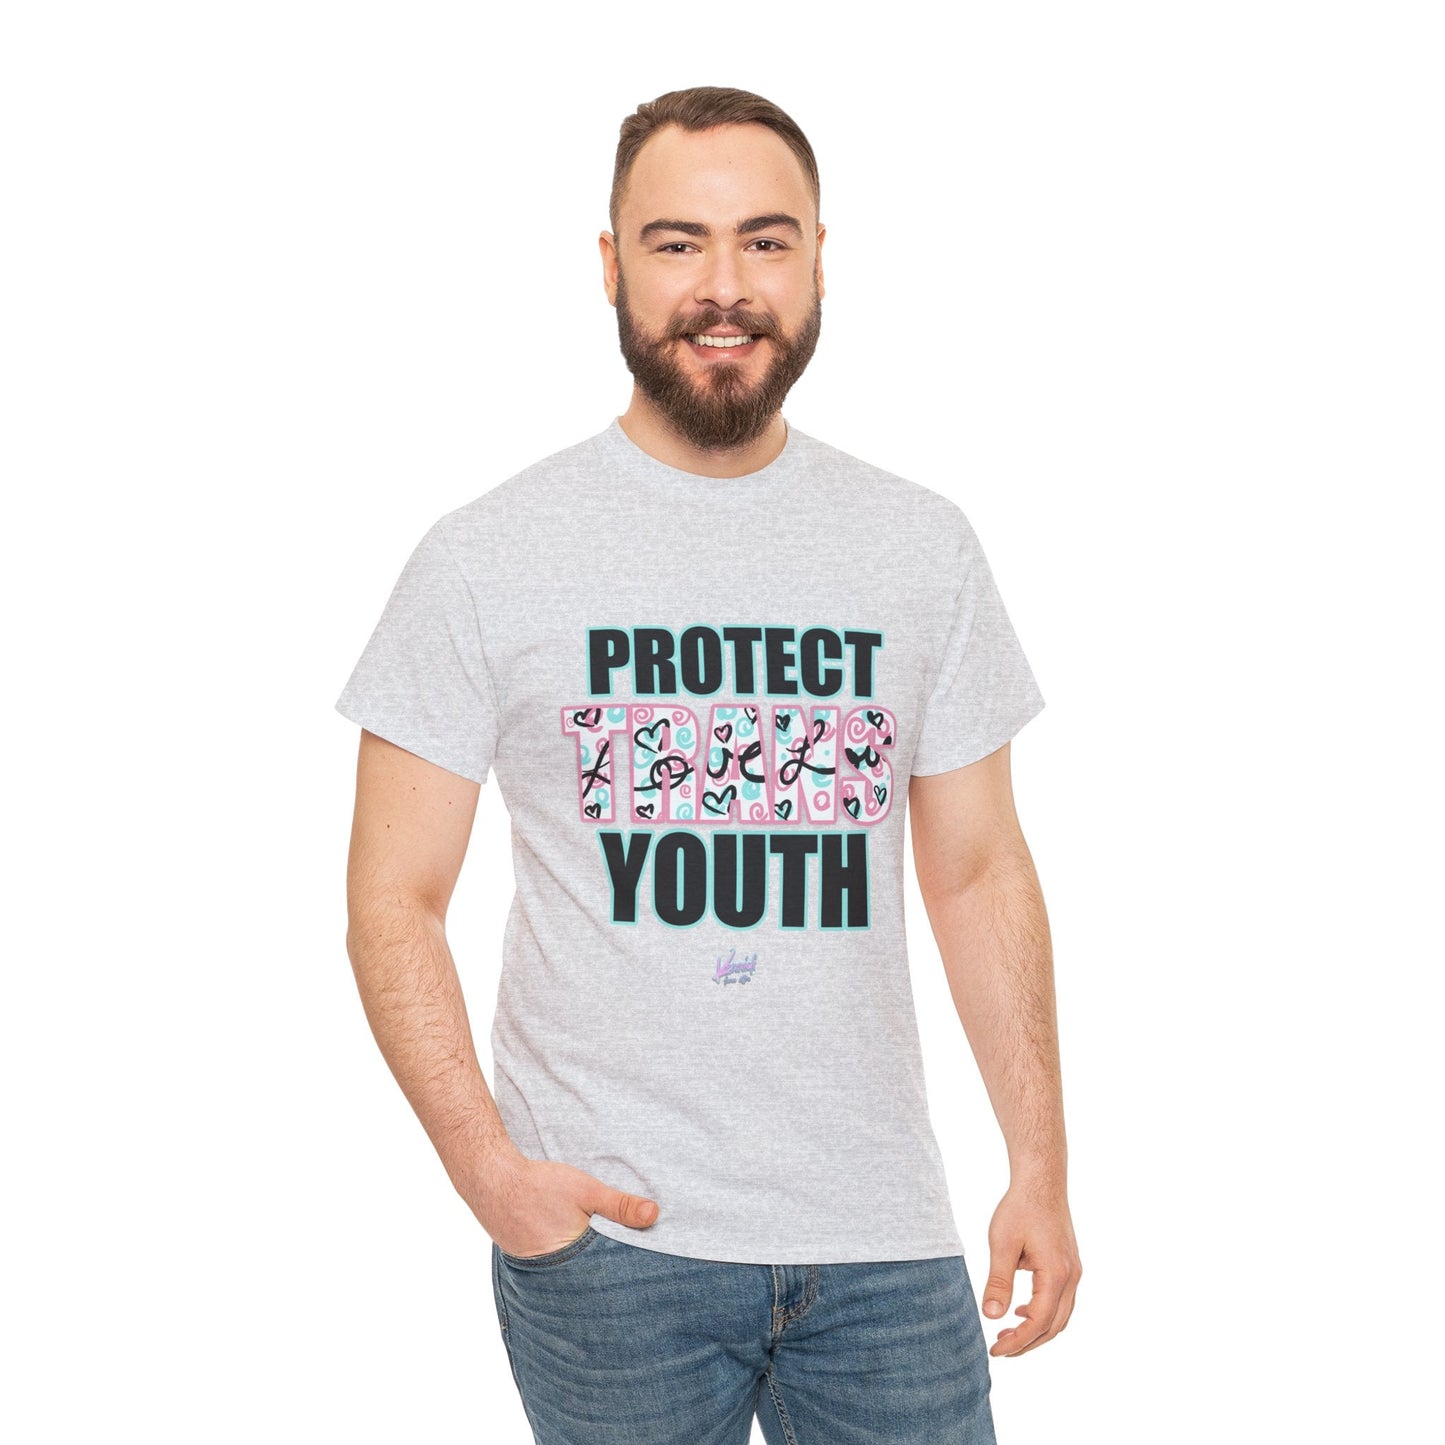 Protect Trans Youth Love 3.0 Unisex Heavy Cotton Tee - Ash / S T - Shirt